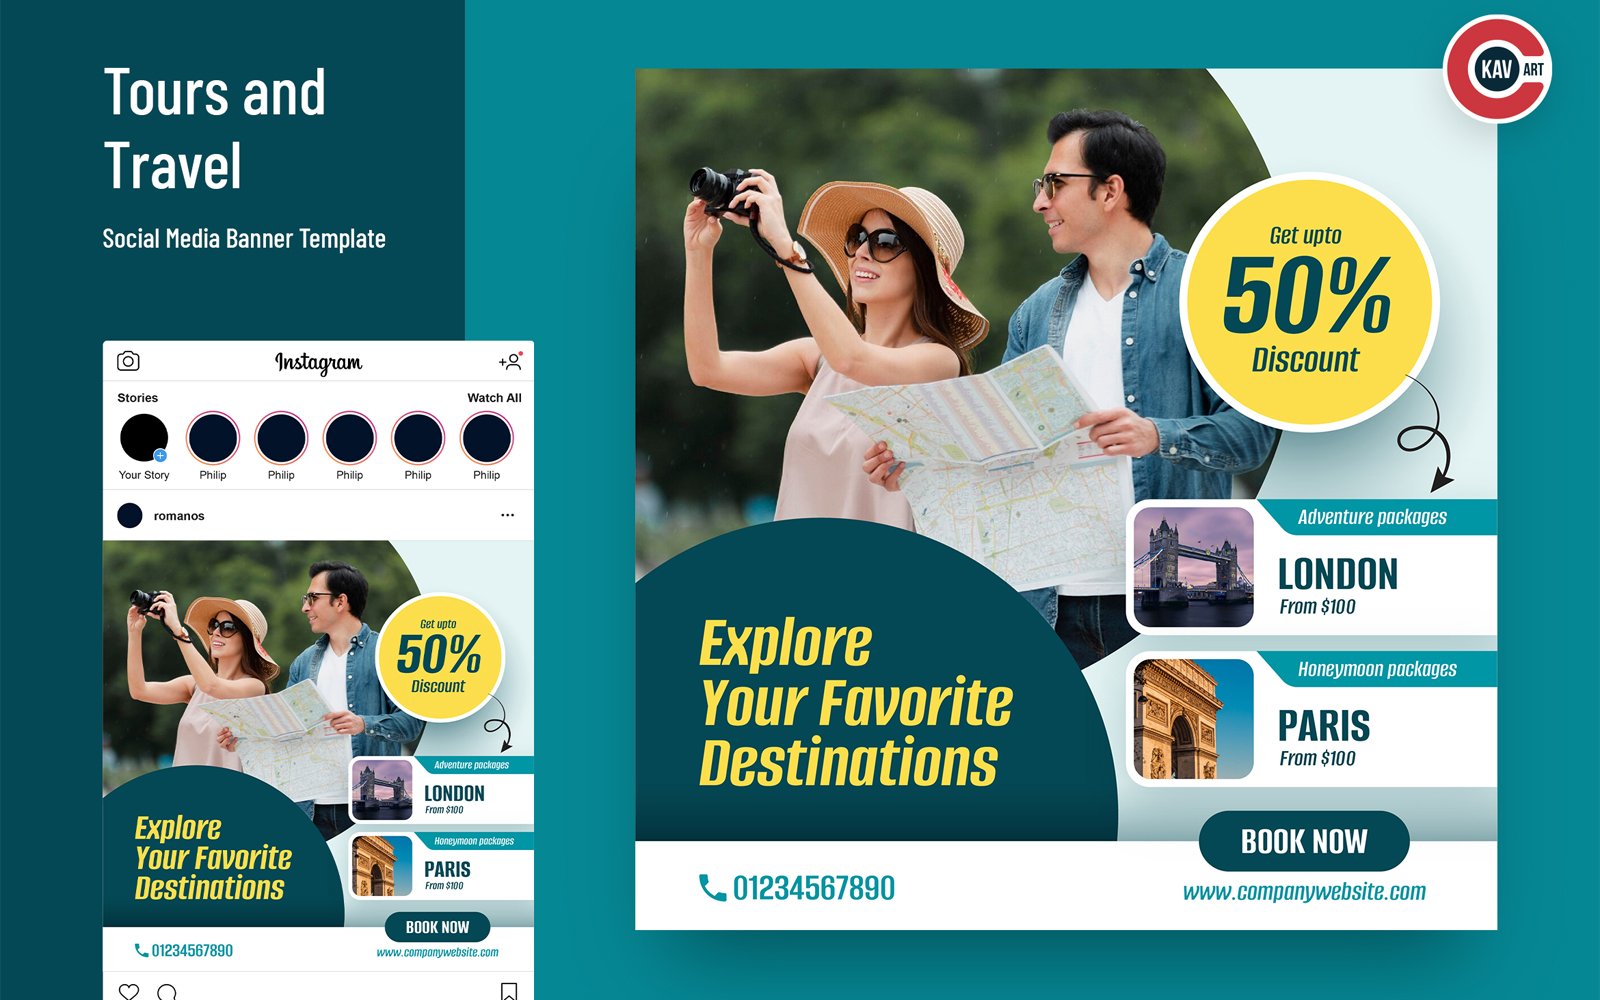 Tours and Travel Social Media Banners - 00289